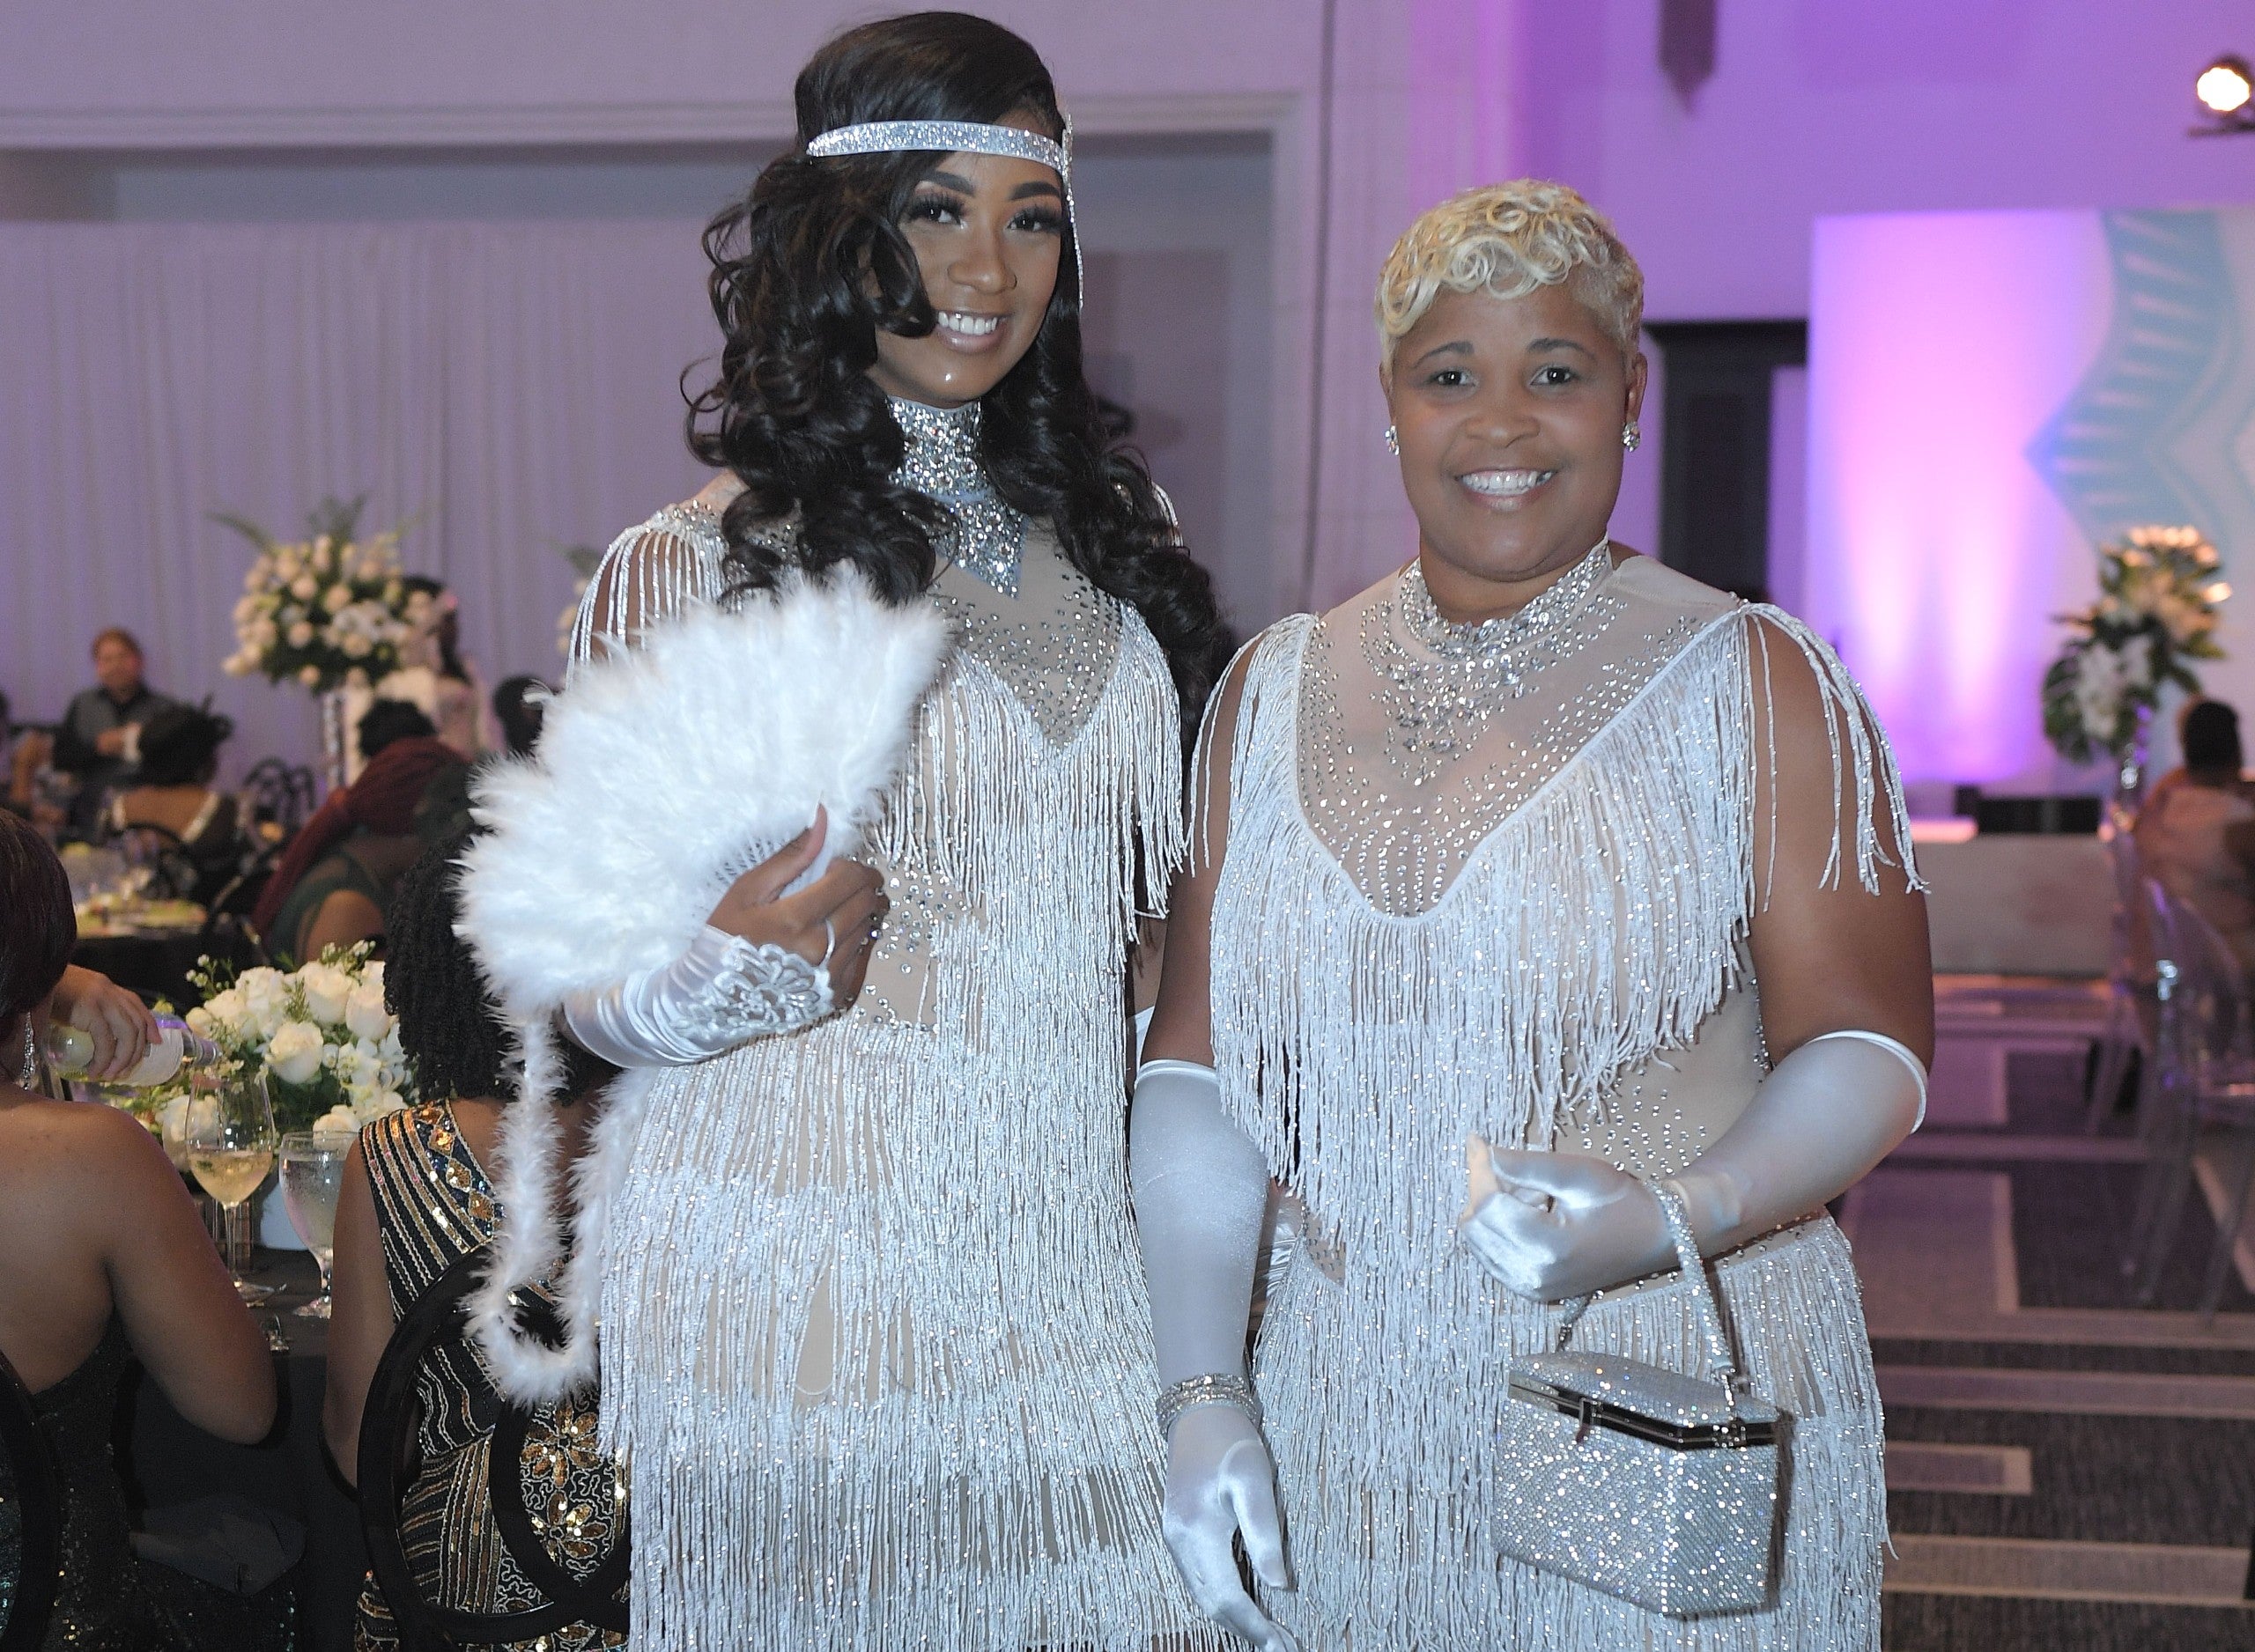 Beauty Moments From The Bawse Conference’s “Harlem Nights” Gala | Essence